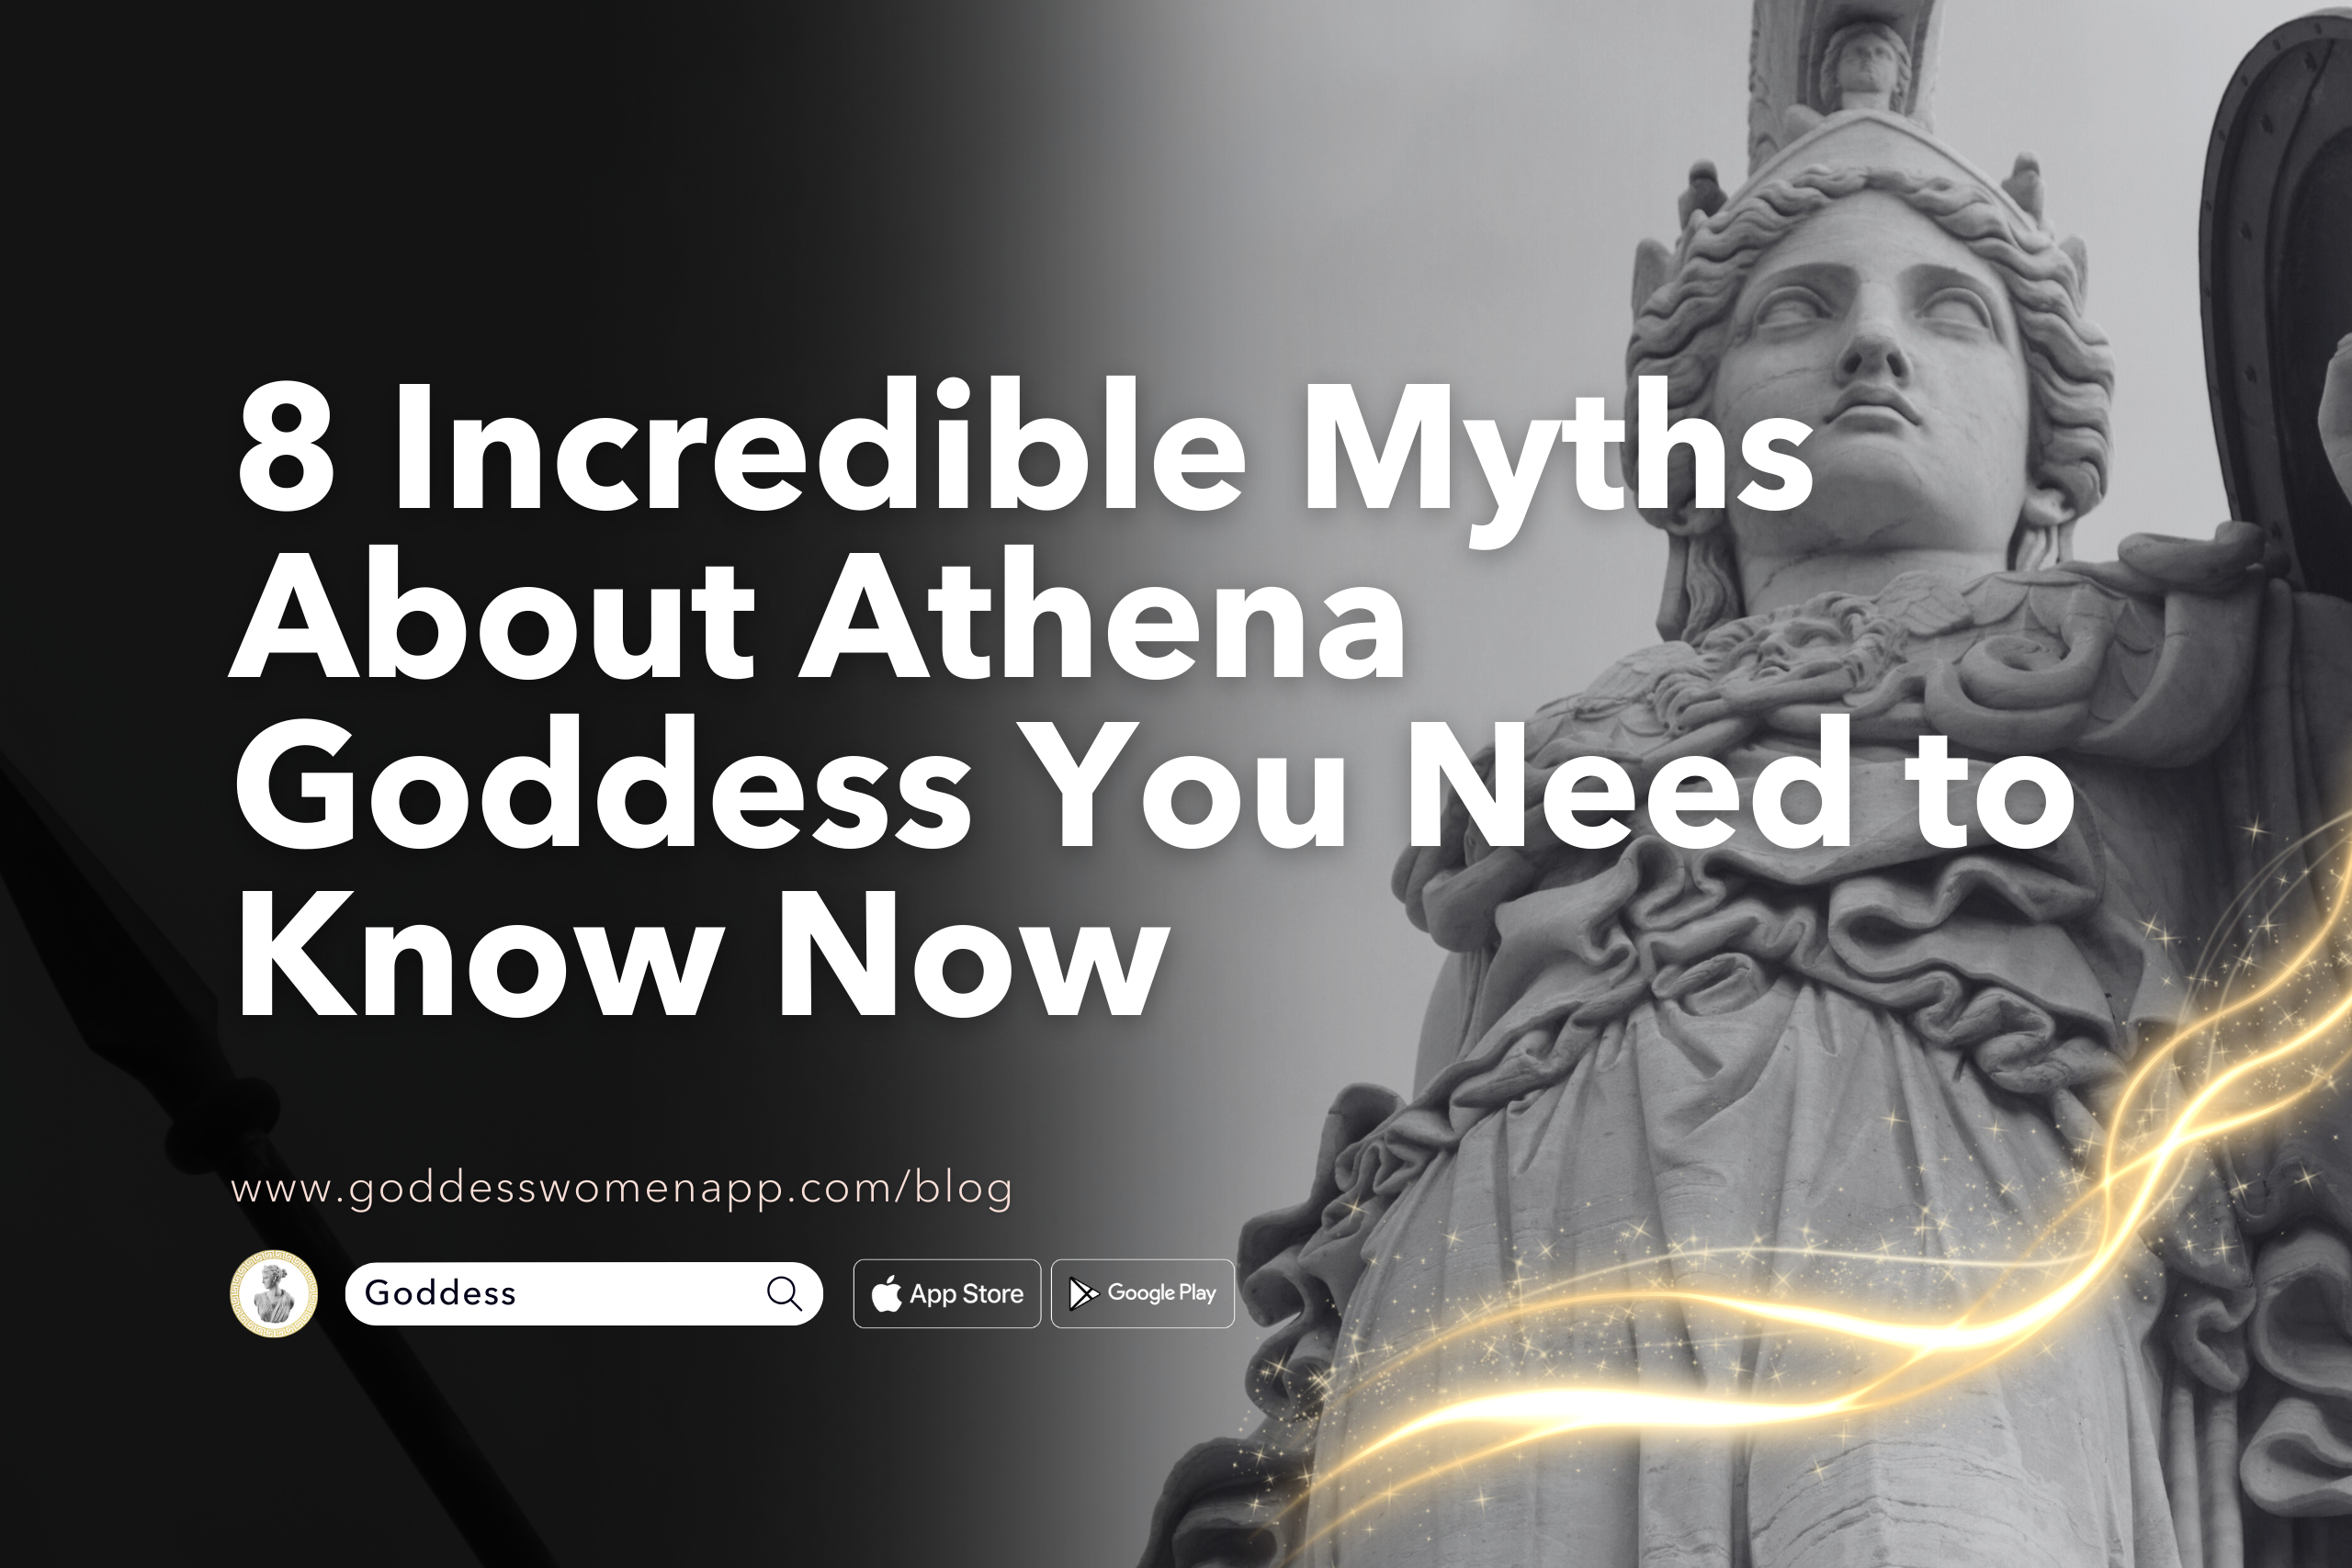 8 Incredible Myths About Athena Goddess You Need to Know Now